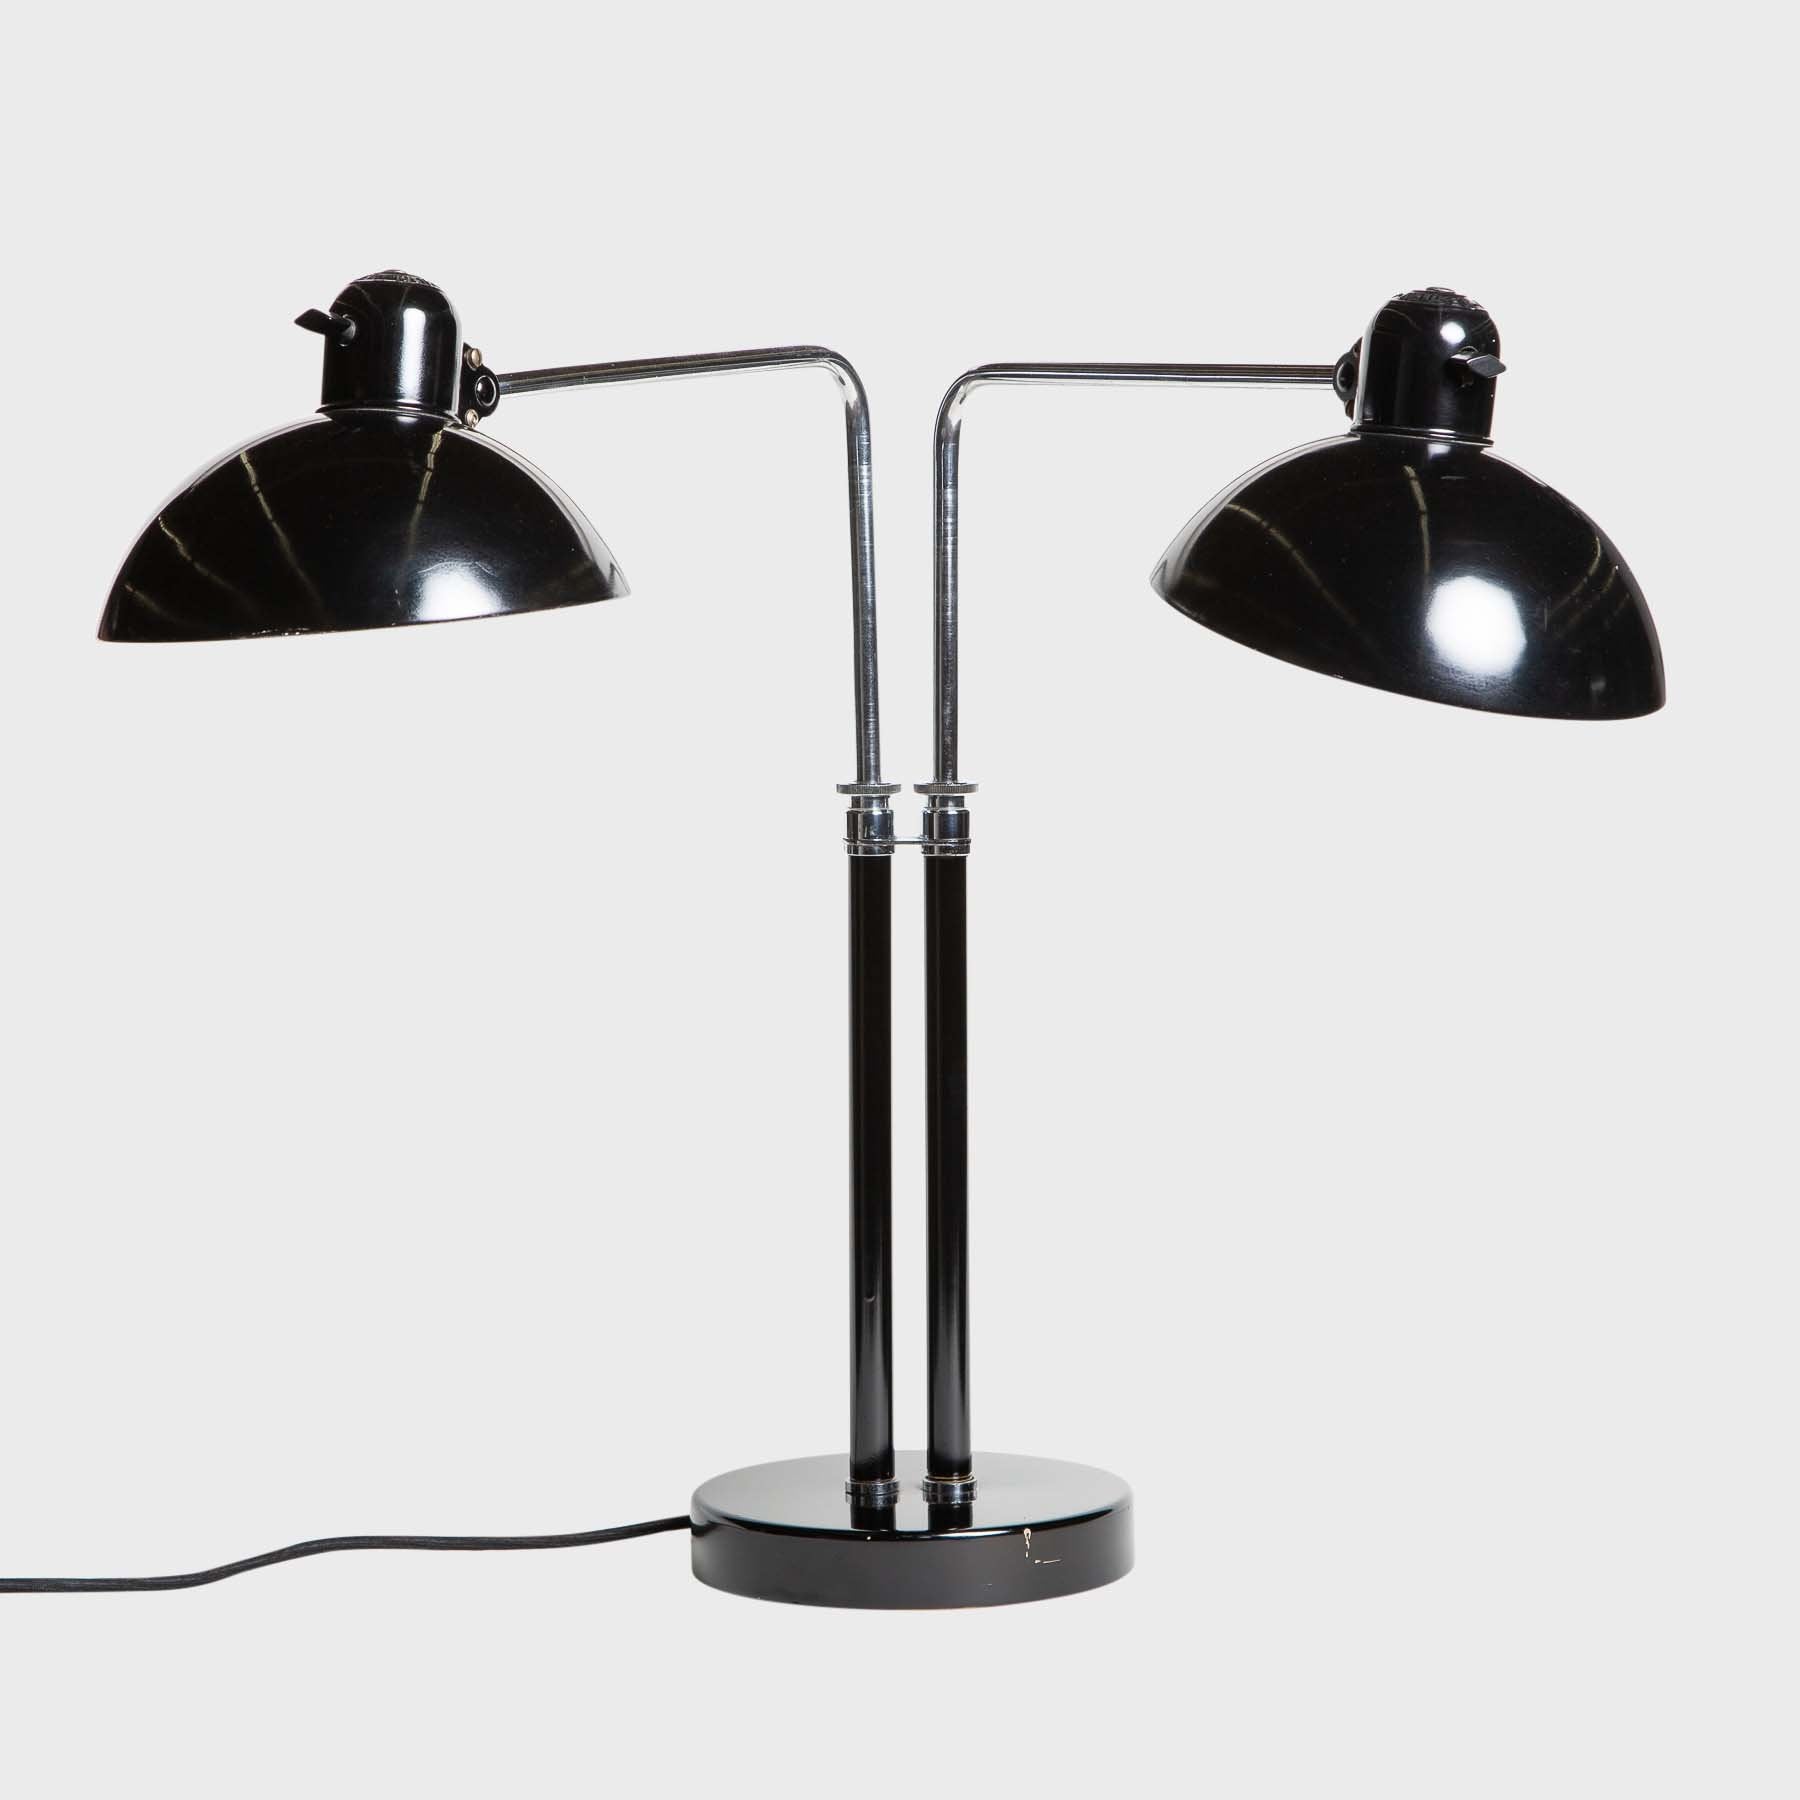 MAXFIELD PRIVATE COLLECTION | 1930'S BAUHAUS DELL LAMP